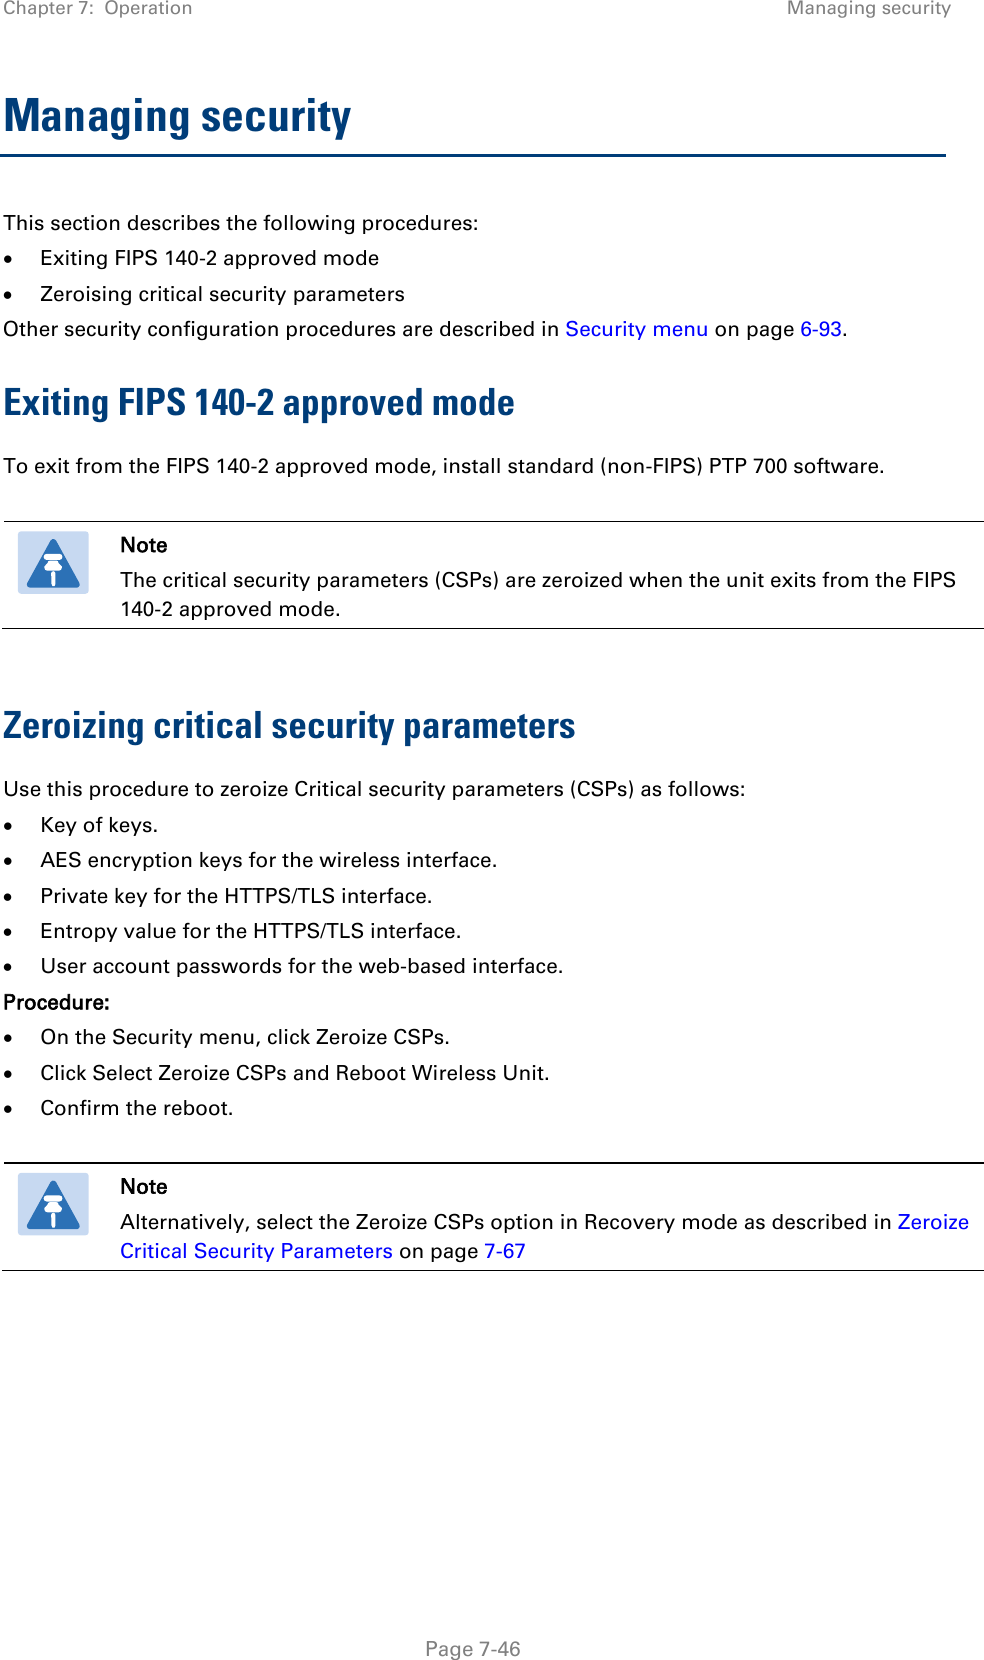 Chapter 7:  Operation Managing security  Managing security This section describes the following procedures: • Exiting FIPS 140-2 approved mode • Zeroising critical security parameters Other security configuration procedures are described in Security menu on page 6-93. Exiting FIPS 140-2 approved mode To exit from the FIPS 140-2 approved mode, install standard (non-FIPS) PTP 700 software.   Note The critical security parameters (CSPs) are zeroized when the unit exits from the FIPS 140-2 approved mode.  Zeroizing critical security parameters Use this procedure to zeroize Critical security parameters (CSPs) as follows: • Key of keys. • AES encryption keys for the wireless interface. • Private key for the HTTPS/TLS interface. • Entropy value for the HTTPS/TLS interface. • User account passwords for the web-based interface. Procedure: • On the Security menu, click Zeroize CSPs. • Click Select Zeroize CSPs and Reboot Wireless Unit. • Confirm the reboot.   Note Alternatively, select the Zeroize CSPs option in Recovery mode as described in Zeroize Critical Security Parameters on page 7-67   Page 7-46 